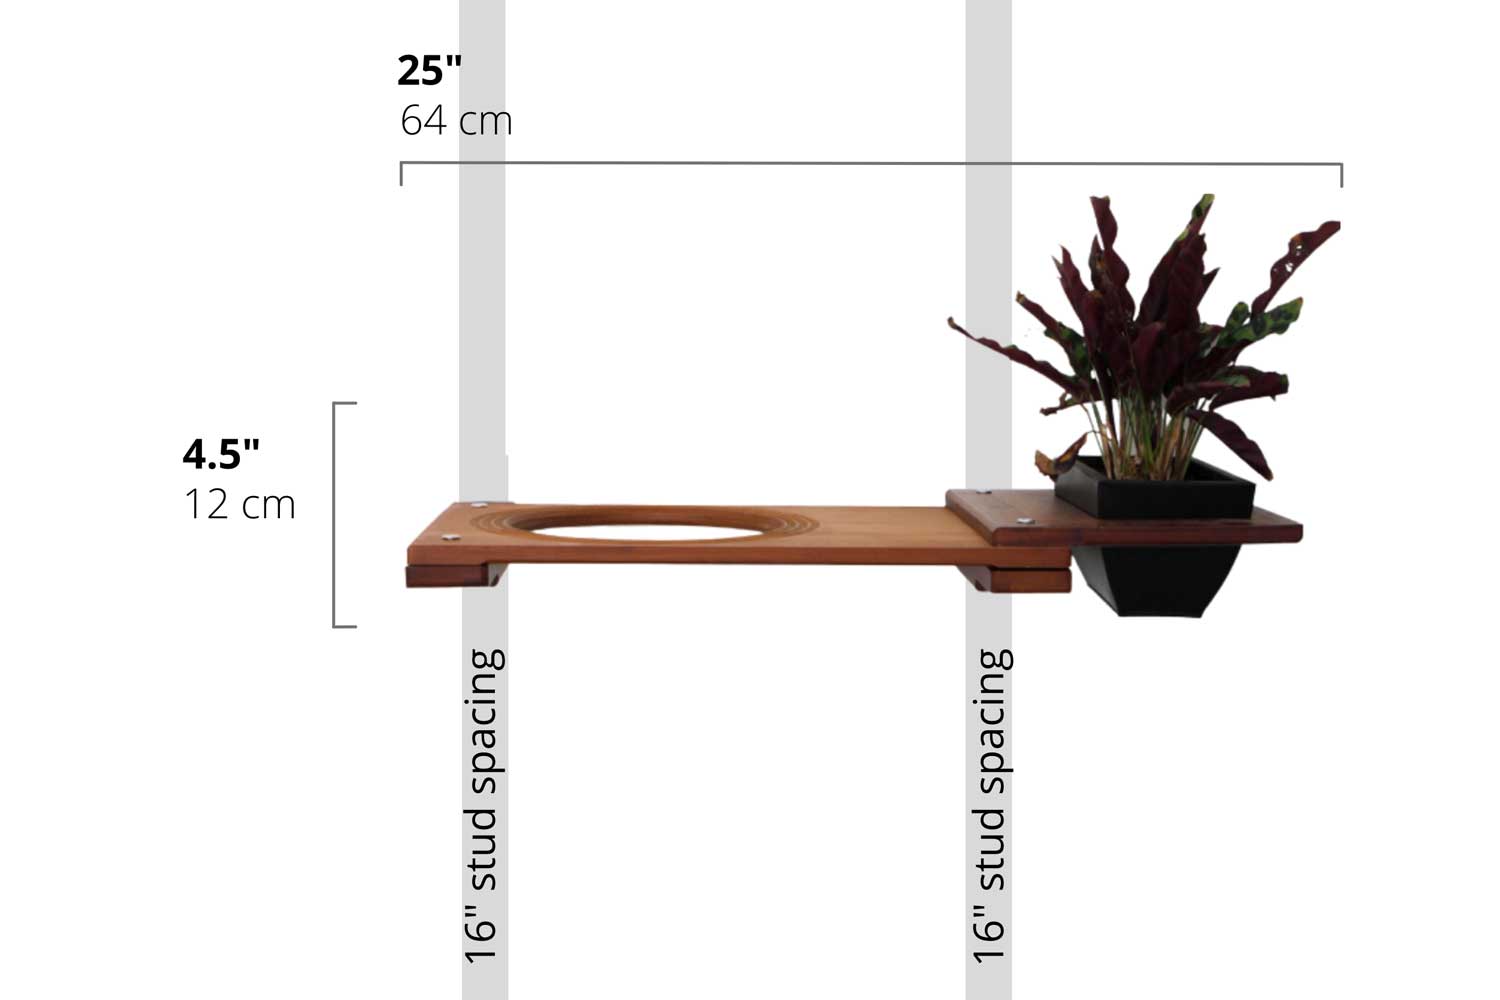 Diagram depicting installation of 25" Planter Hatch on wall with 16" stud spacing.